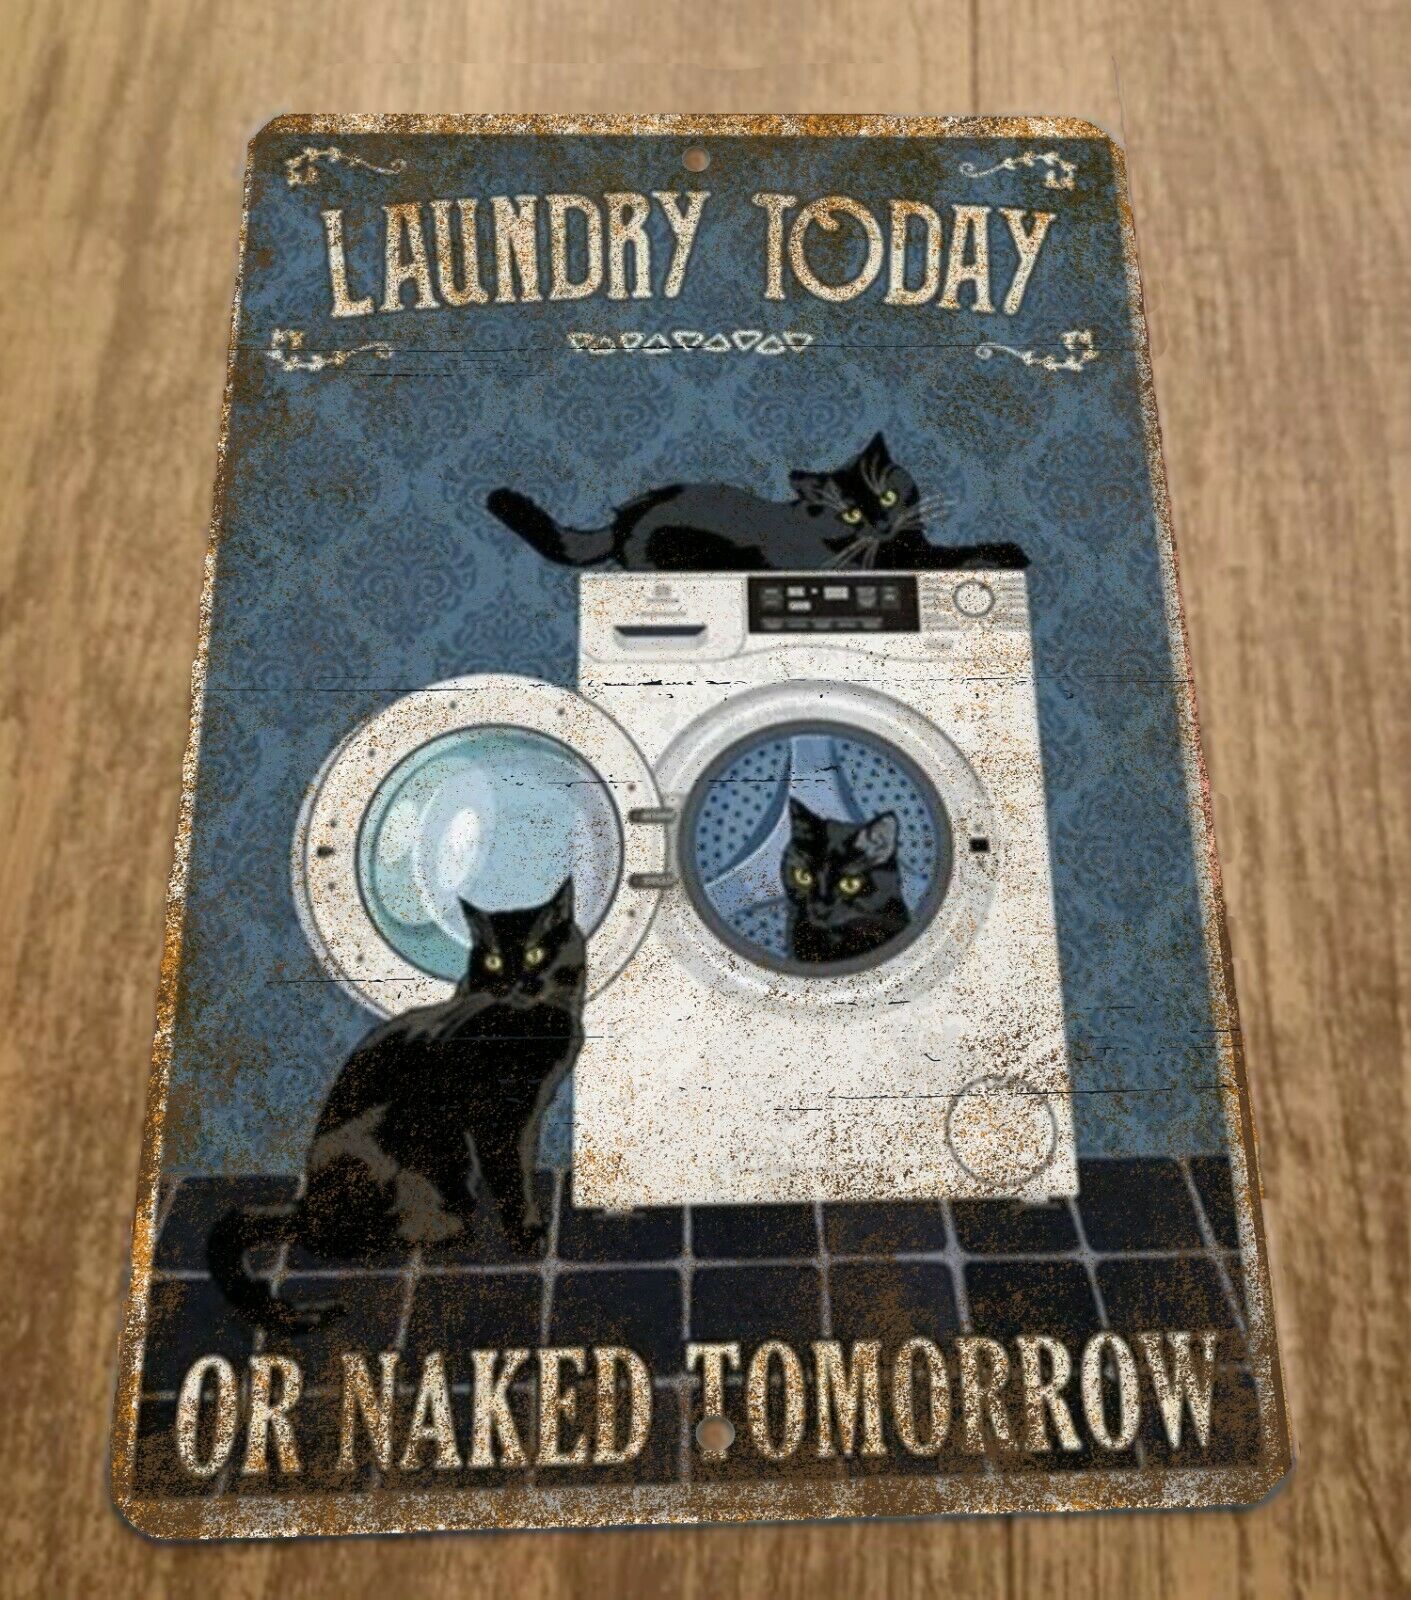 Laundry Today or Naked Tomorrow Black Cats 8x12 Metal Wall Sign Misc Poster